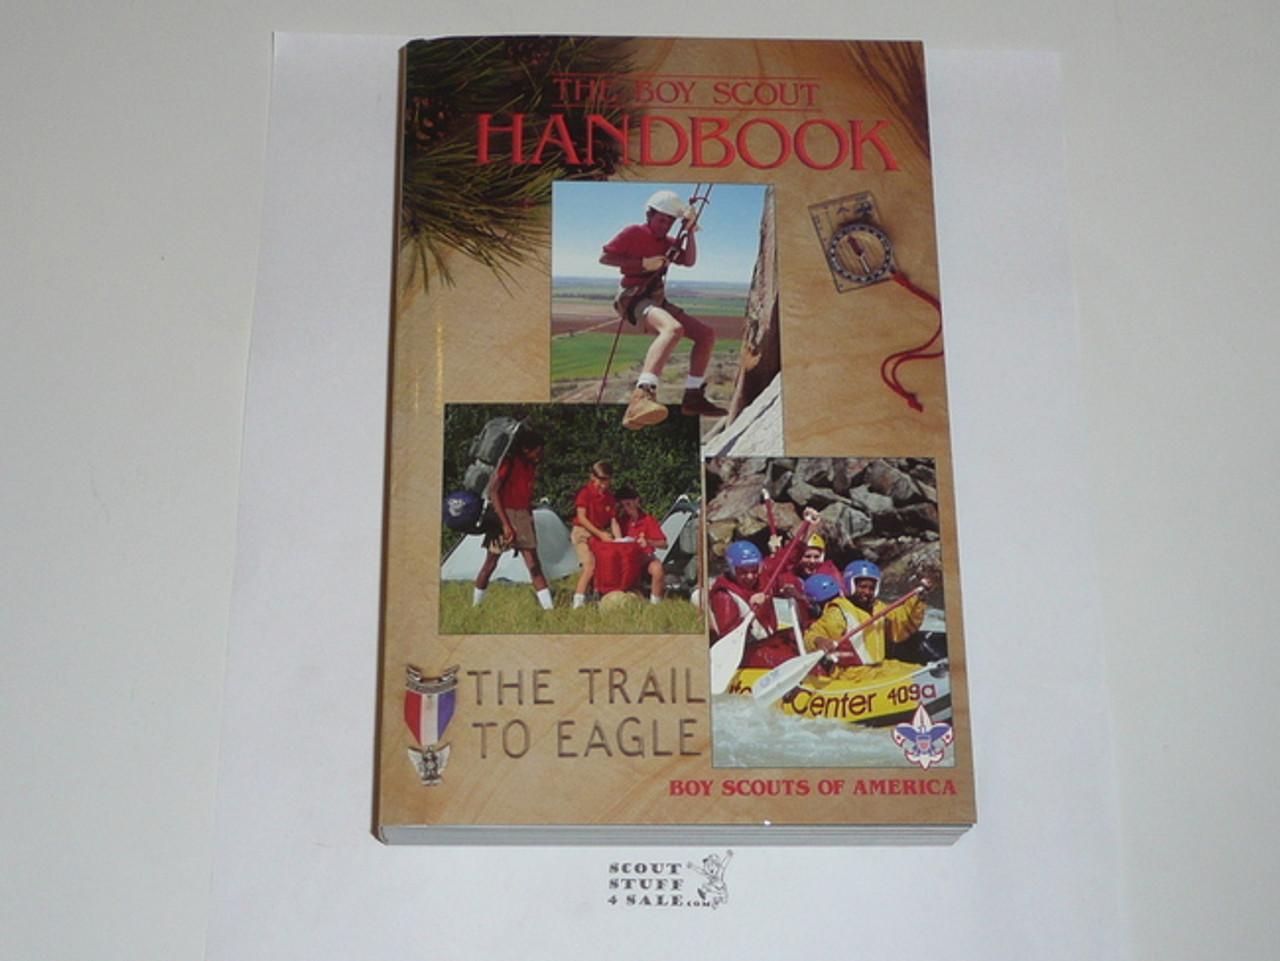 1997 Boy Scout Handbook, Tenth Edition, Seventh Printing, MINT condition